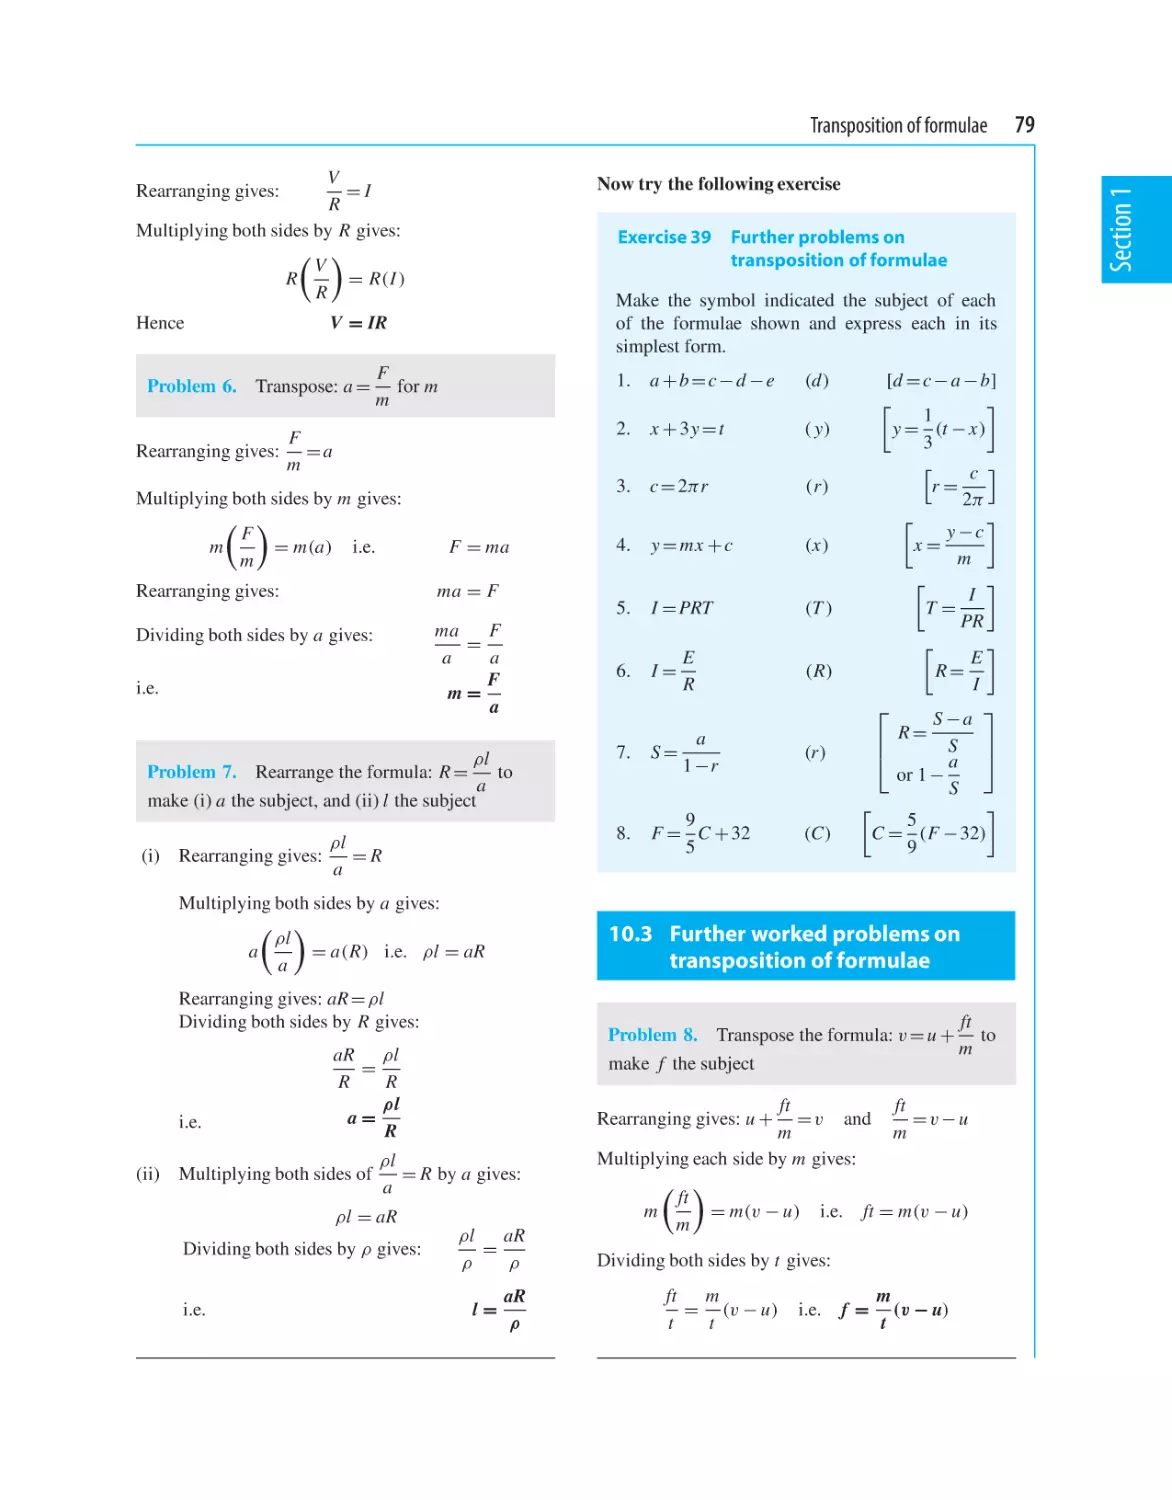 10.3 Further worked problems on transposition of formulae